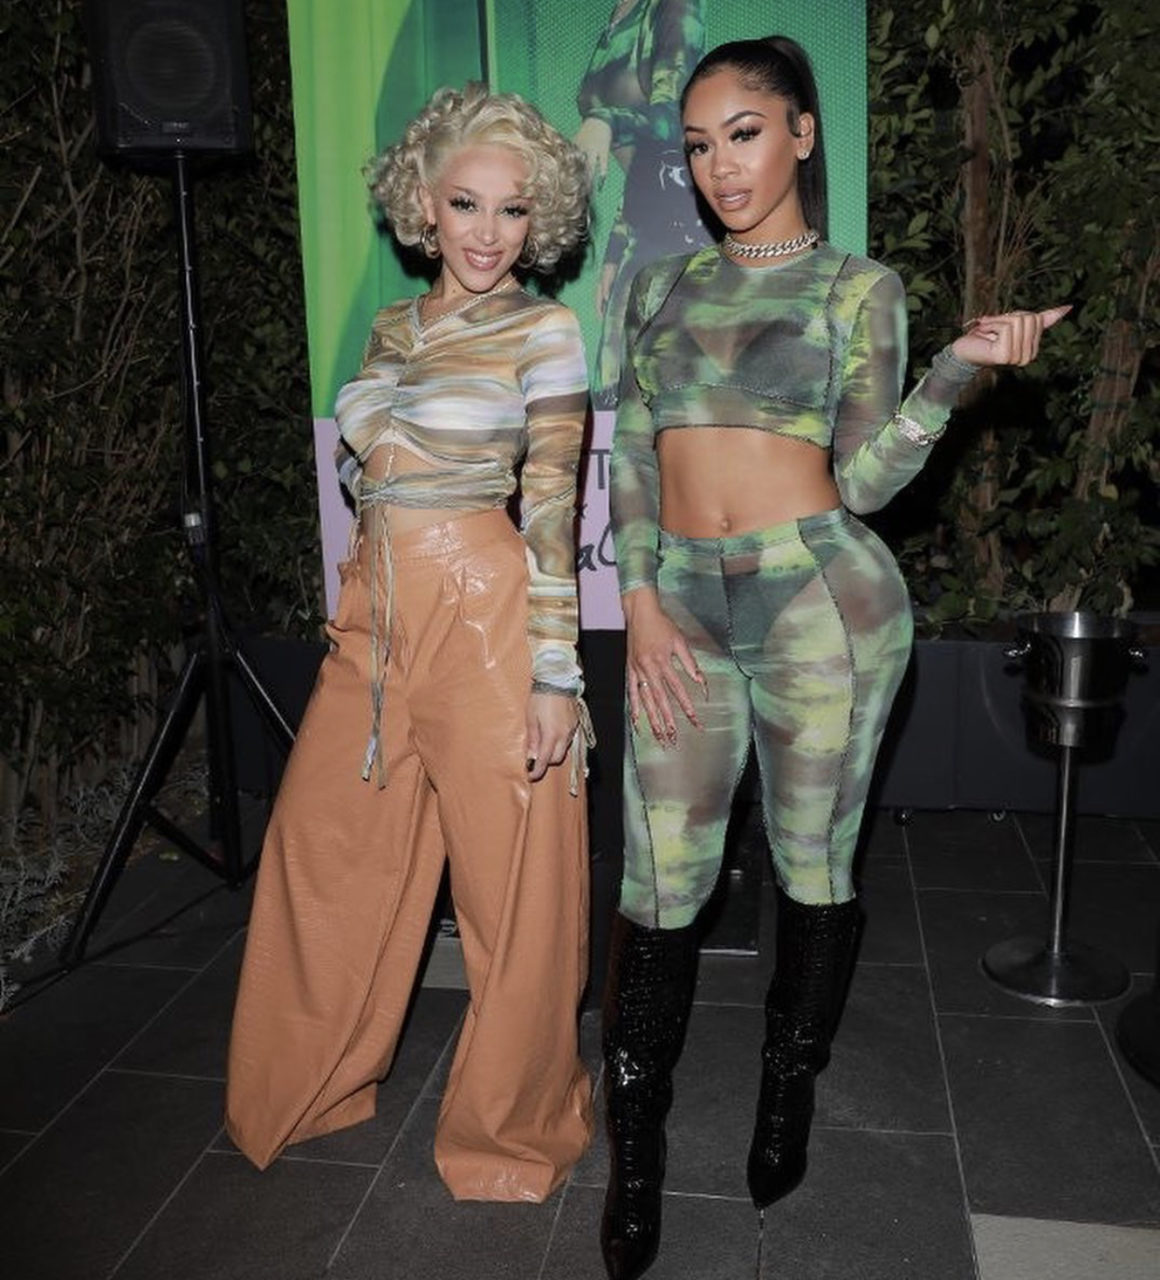 Doja Cat and Saweetie Spotted Celebrating in Looks From the Doja Cat x